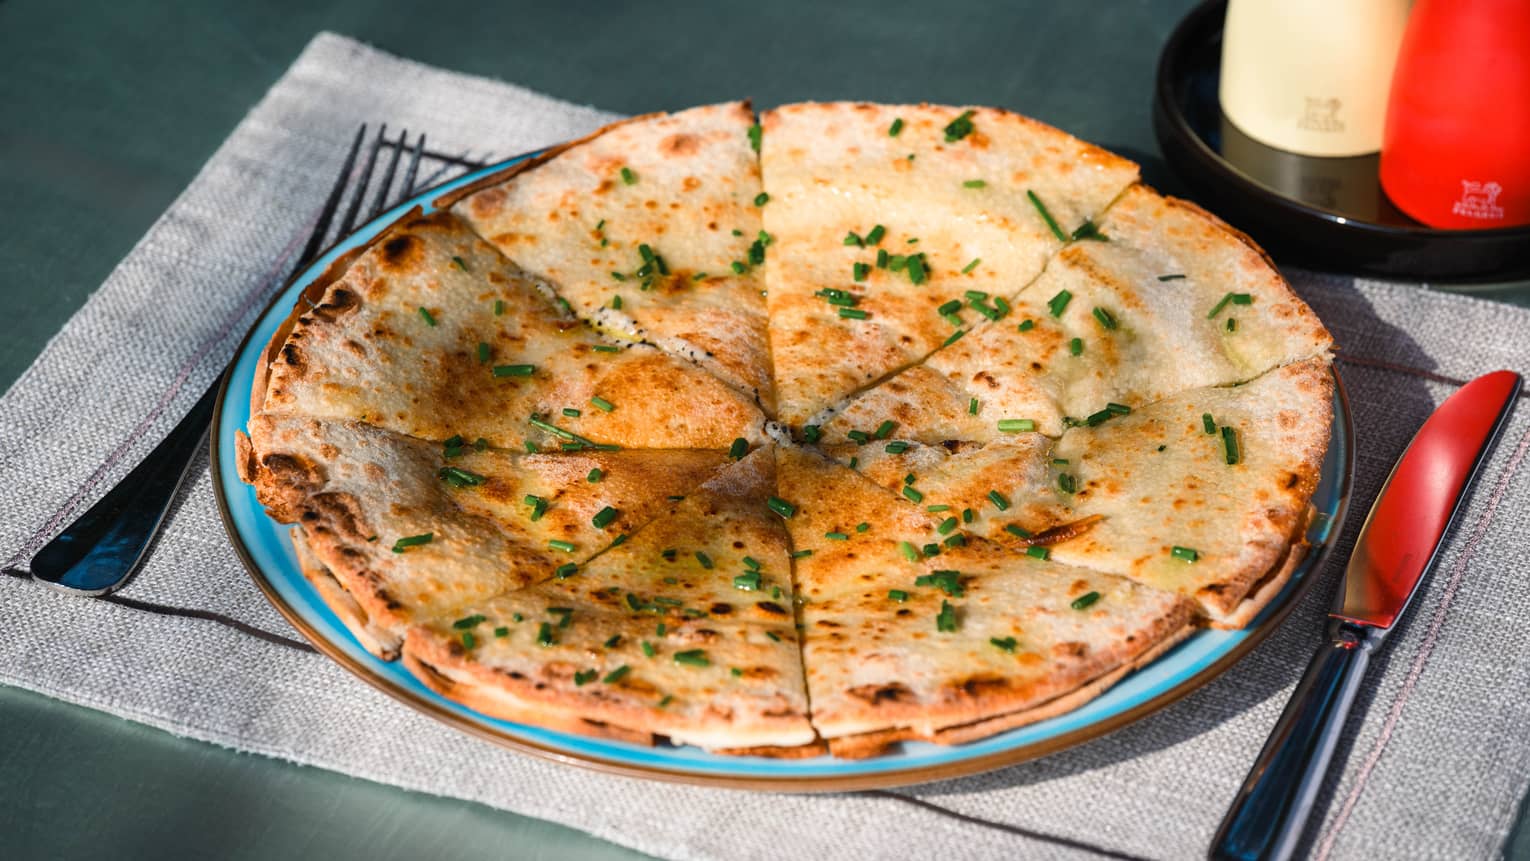 Focaccia round cut into triangles and dusted with chives on blue plate